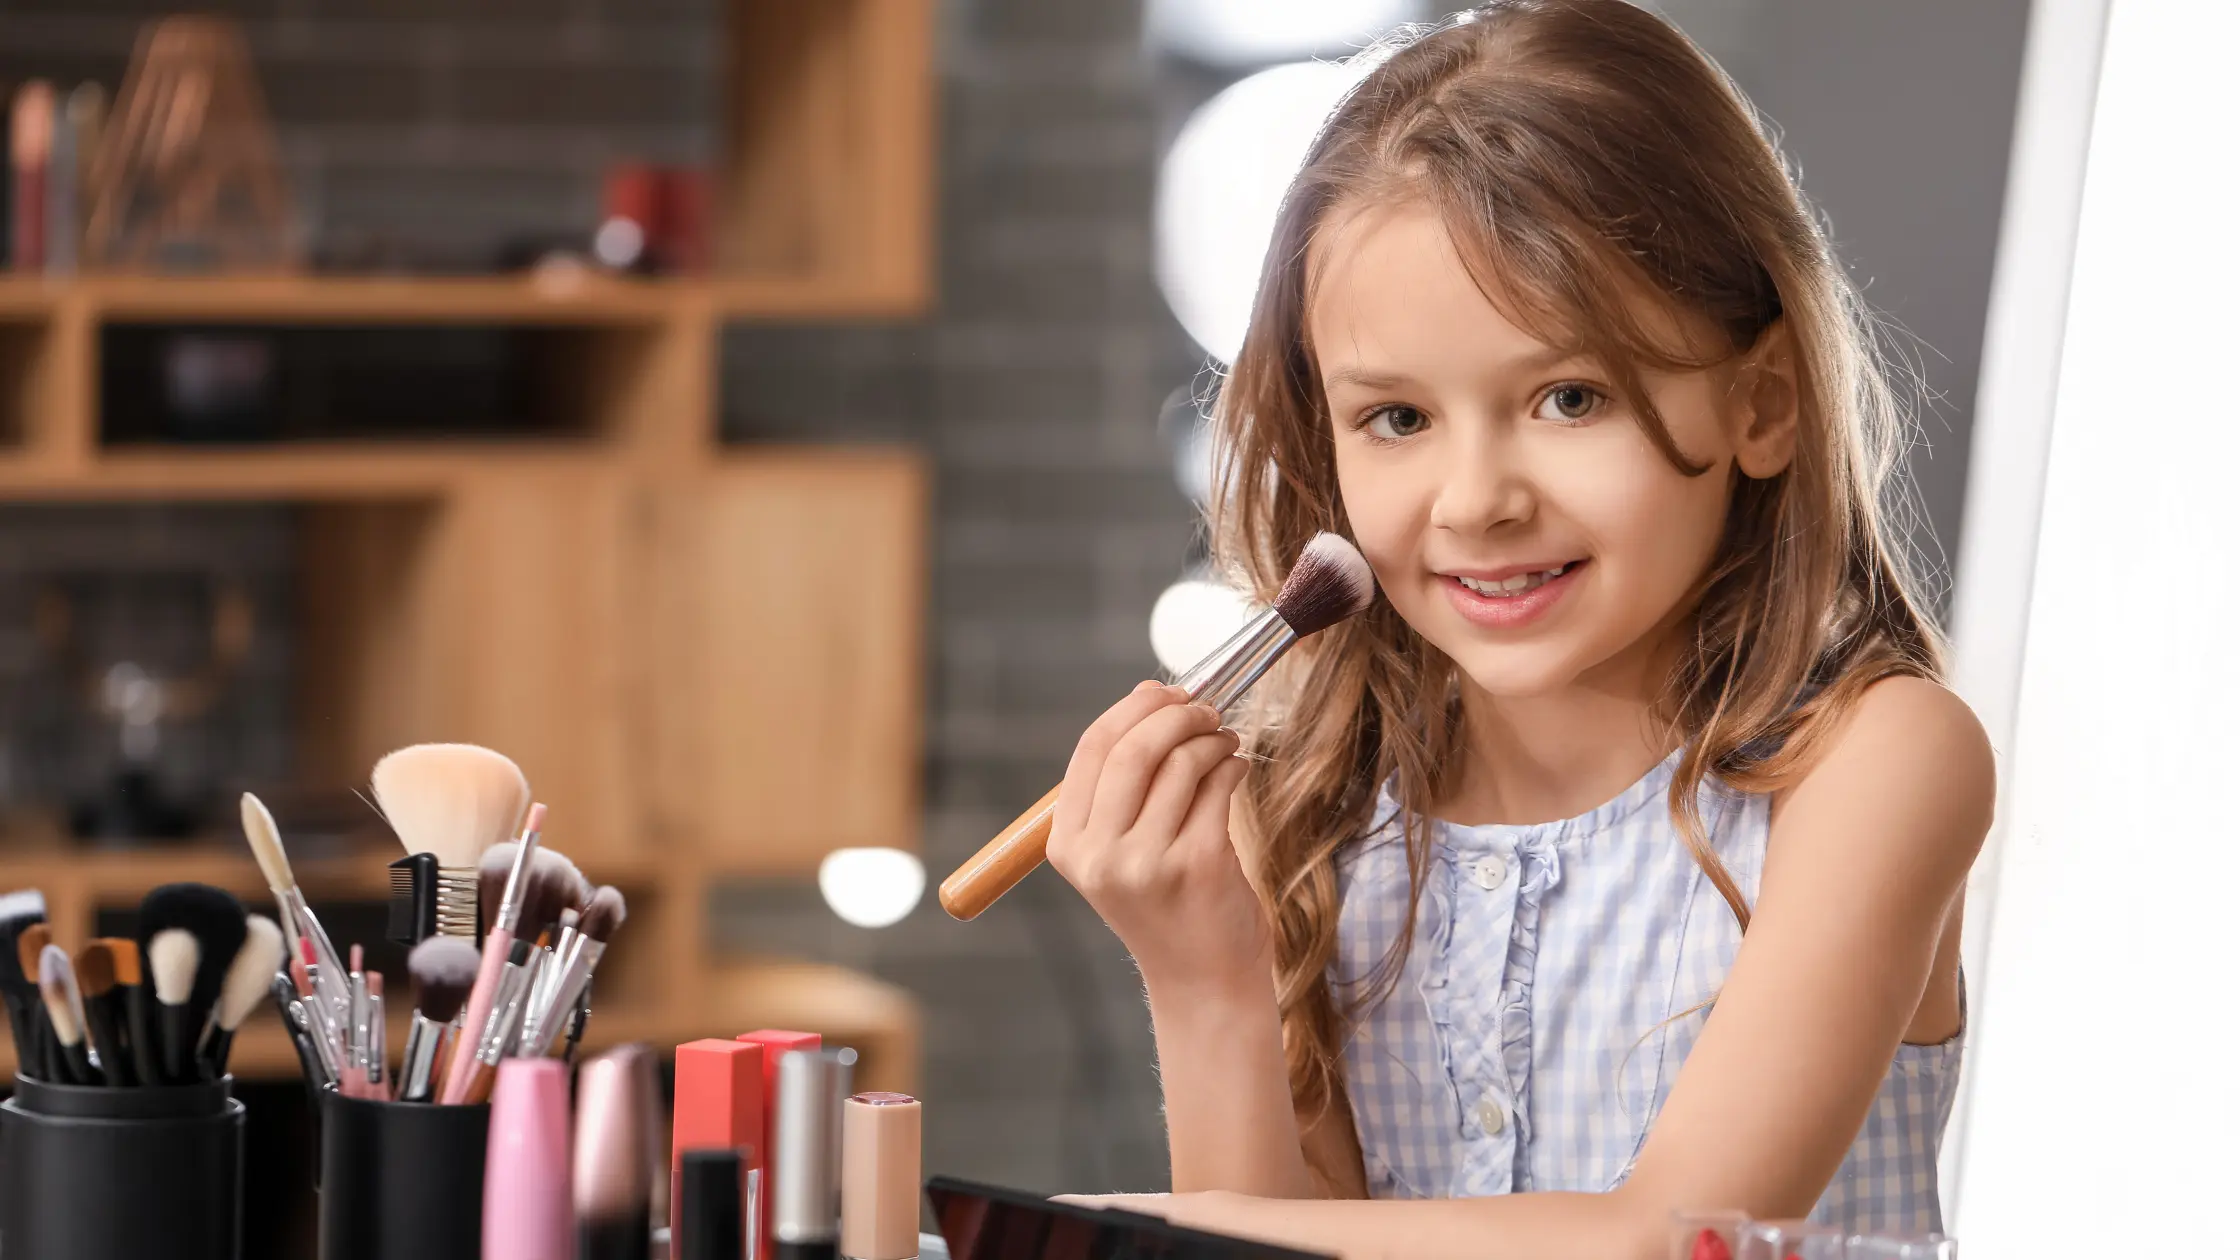 10 Easy Makeup Ideas For Kids